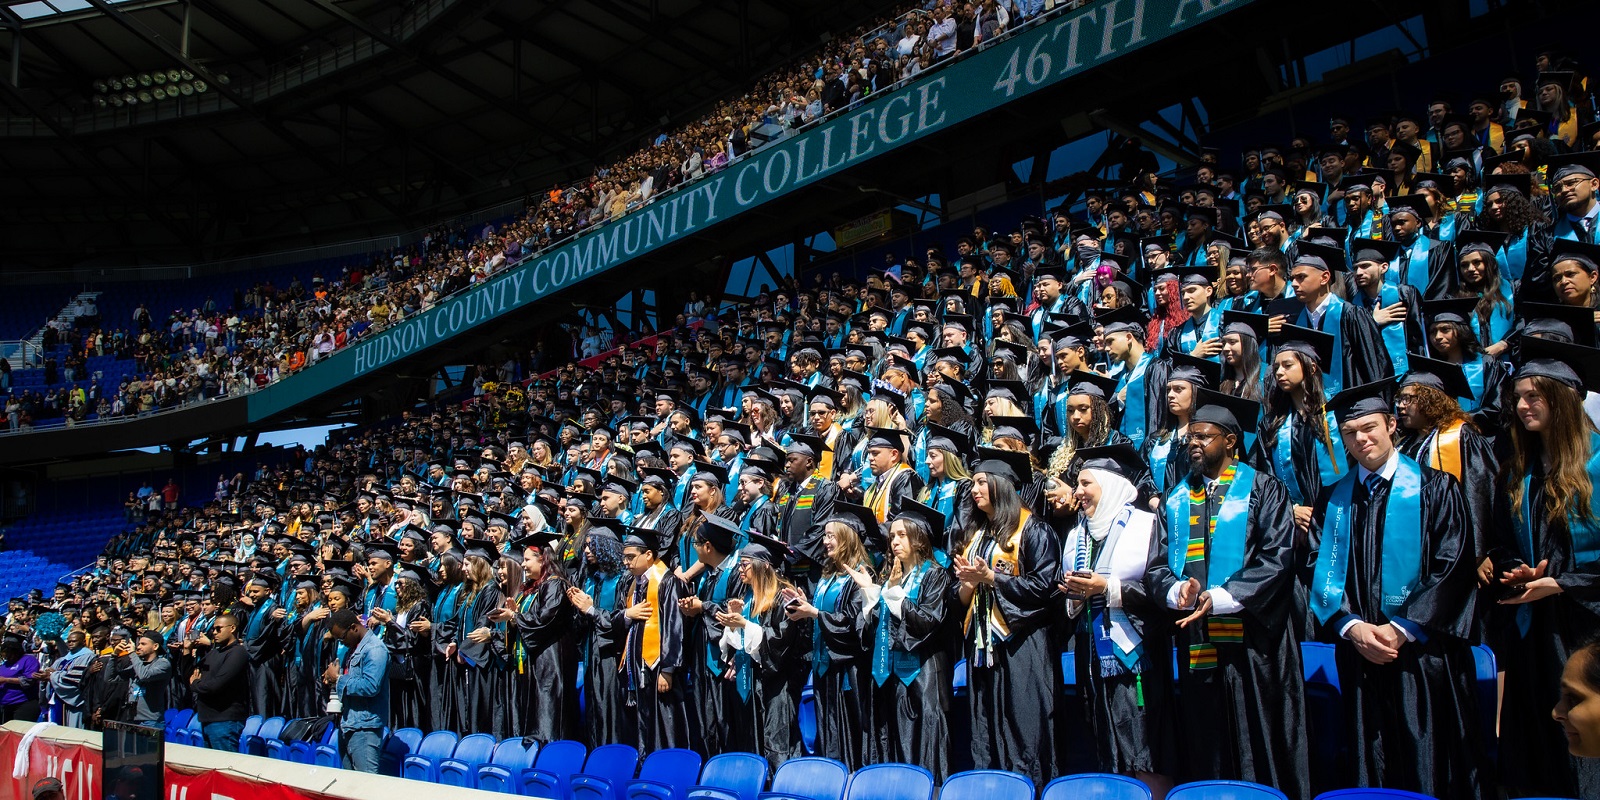 Hudson County Community College will graduate a record 1,532 students at the College’s 47th Annual Commencement Ceremony on May 16 at Red Bull Arena in Harrison, NJ.